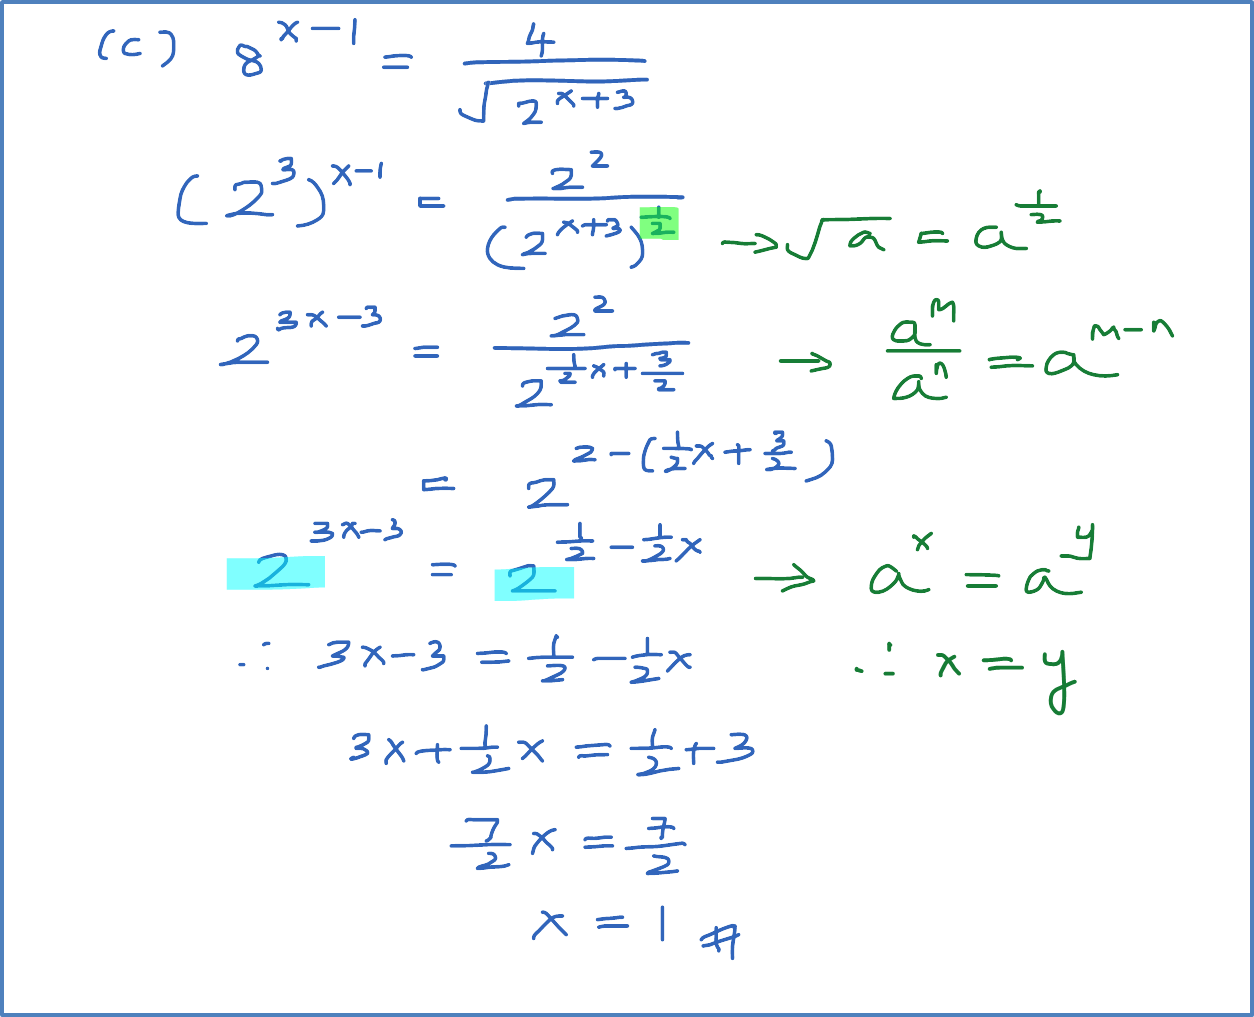 Example 2 (Index Equation - Equal Base) - SPM Additional 